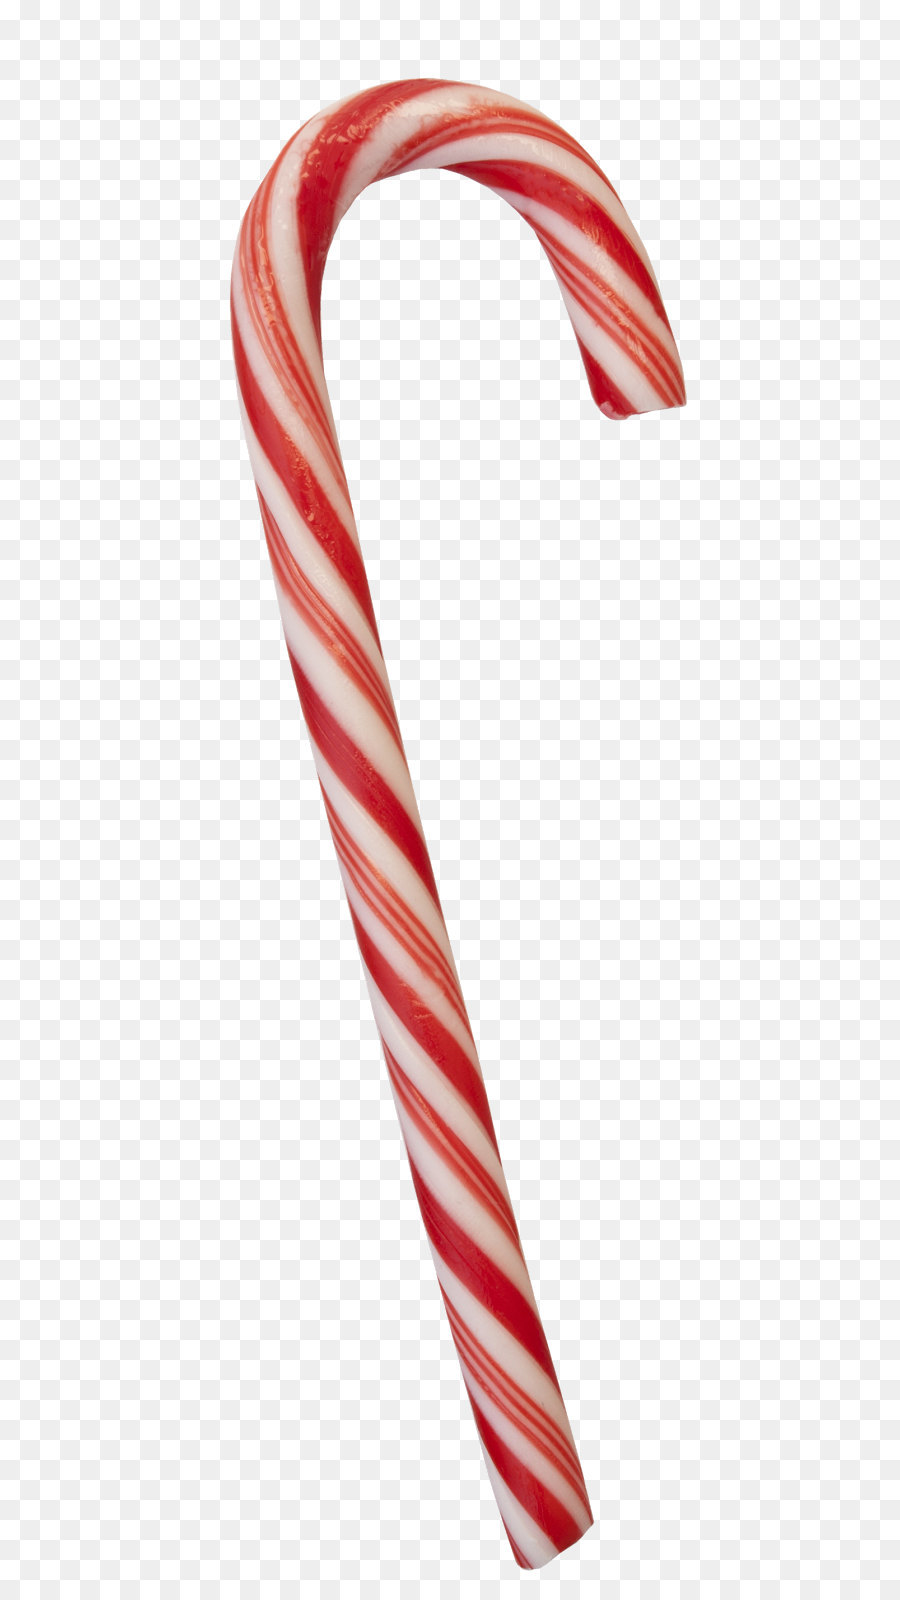 Candy cane Hamlet Red White Font - Christmas candy PNG png download - 616*1600 - Free Transparent Candy Cane png Download.